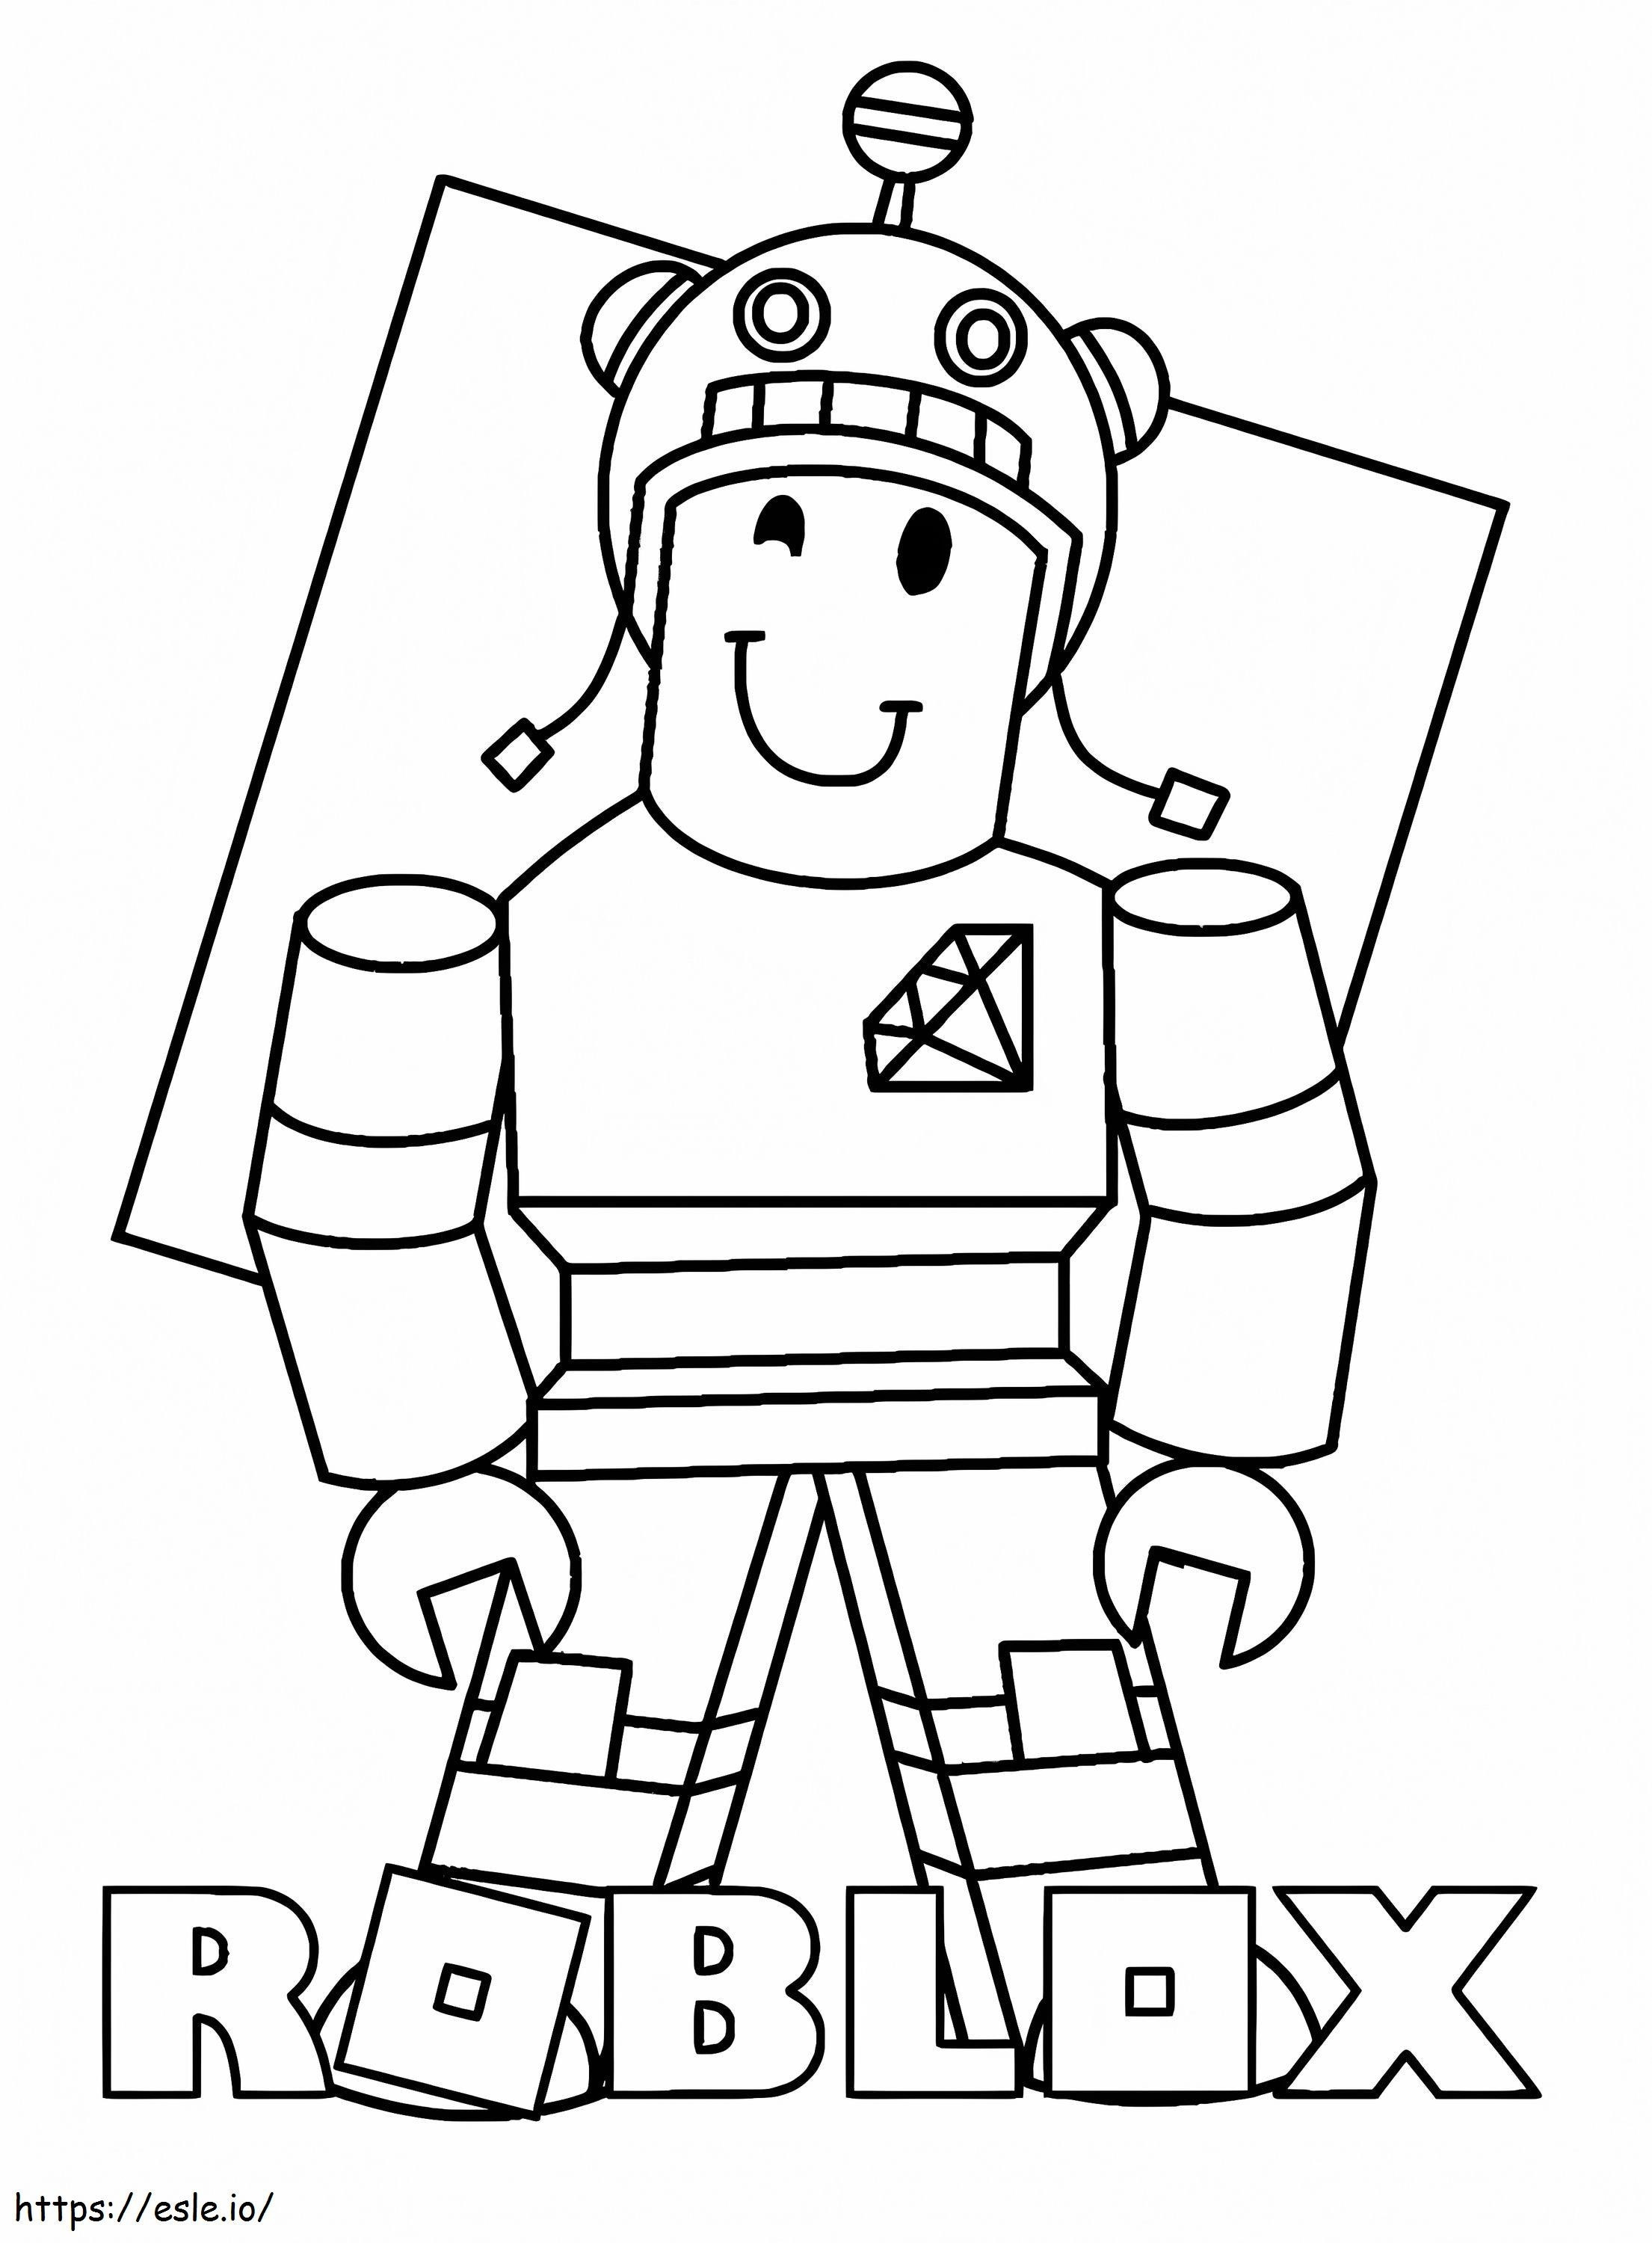 Roblox 3 coloring page